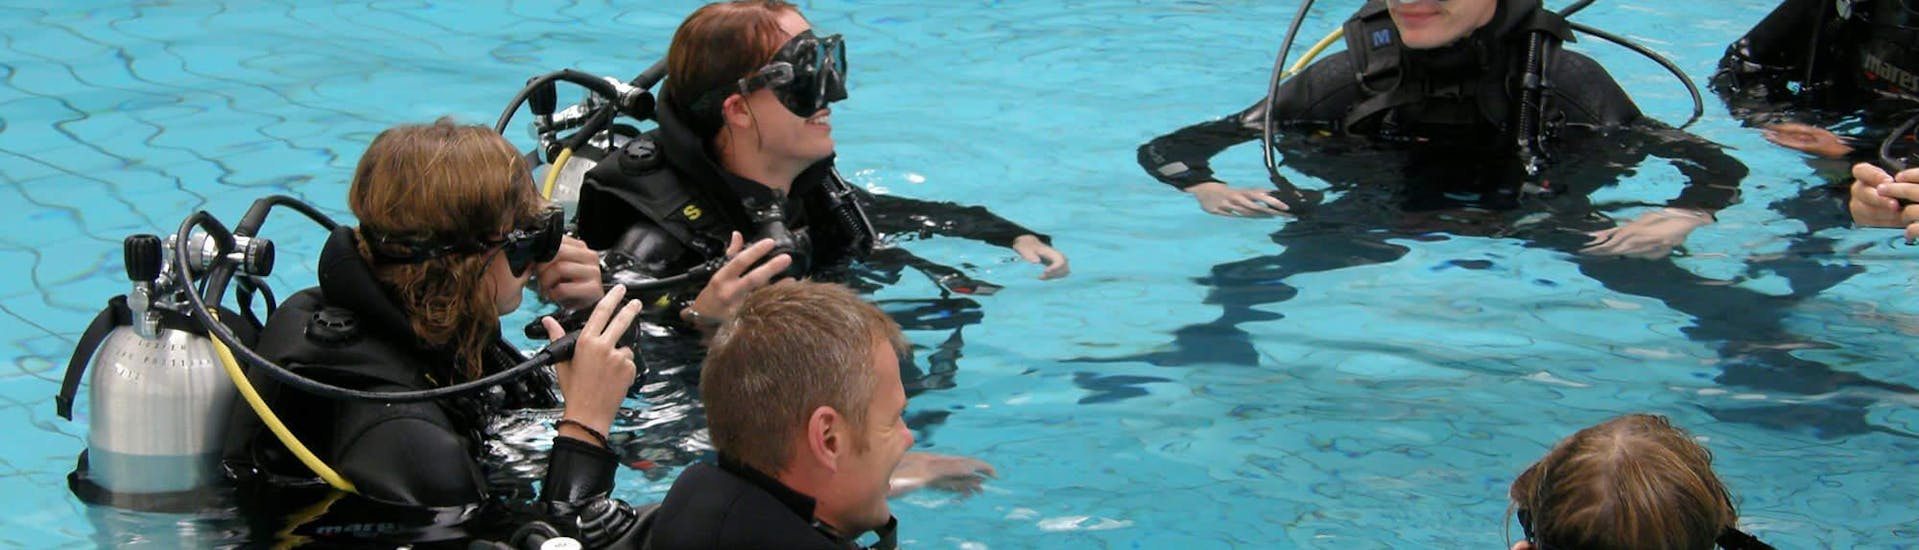 Scuba Diving Course for Beginners - SSI Open Water Diver.